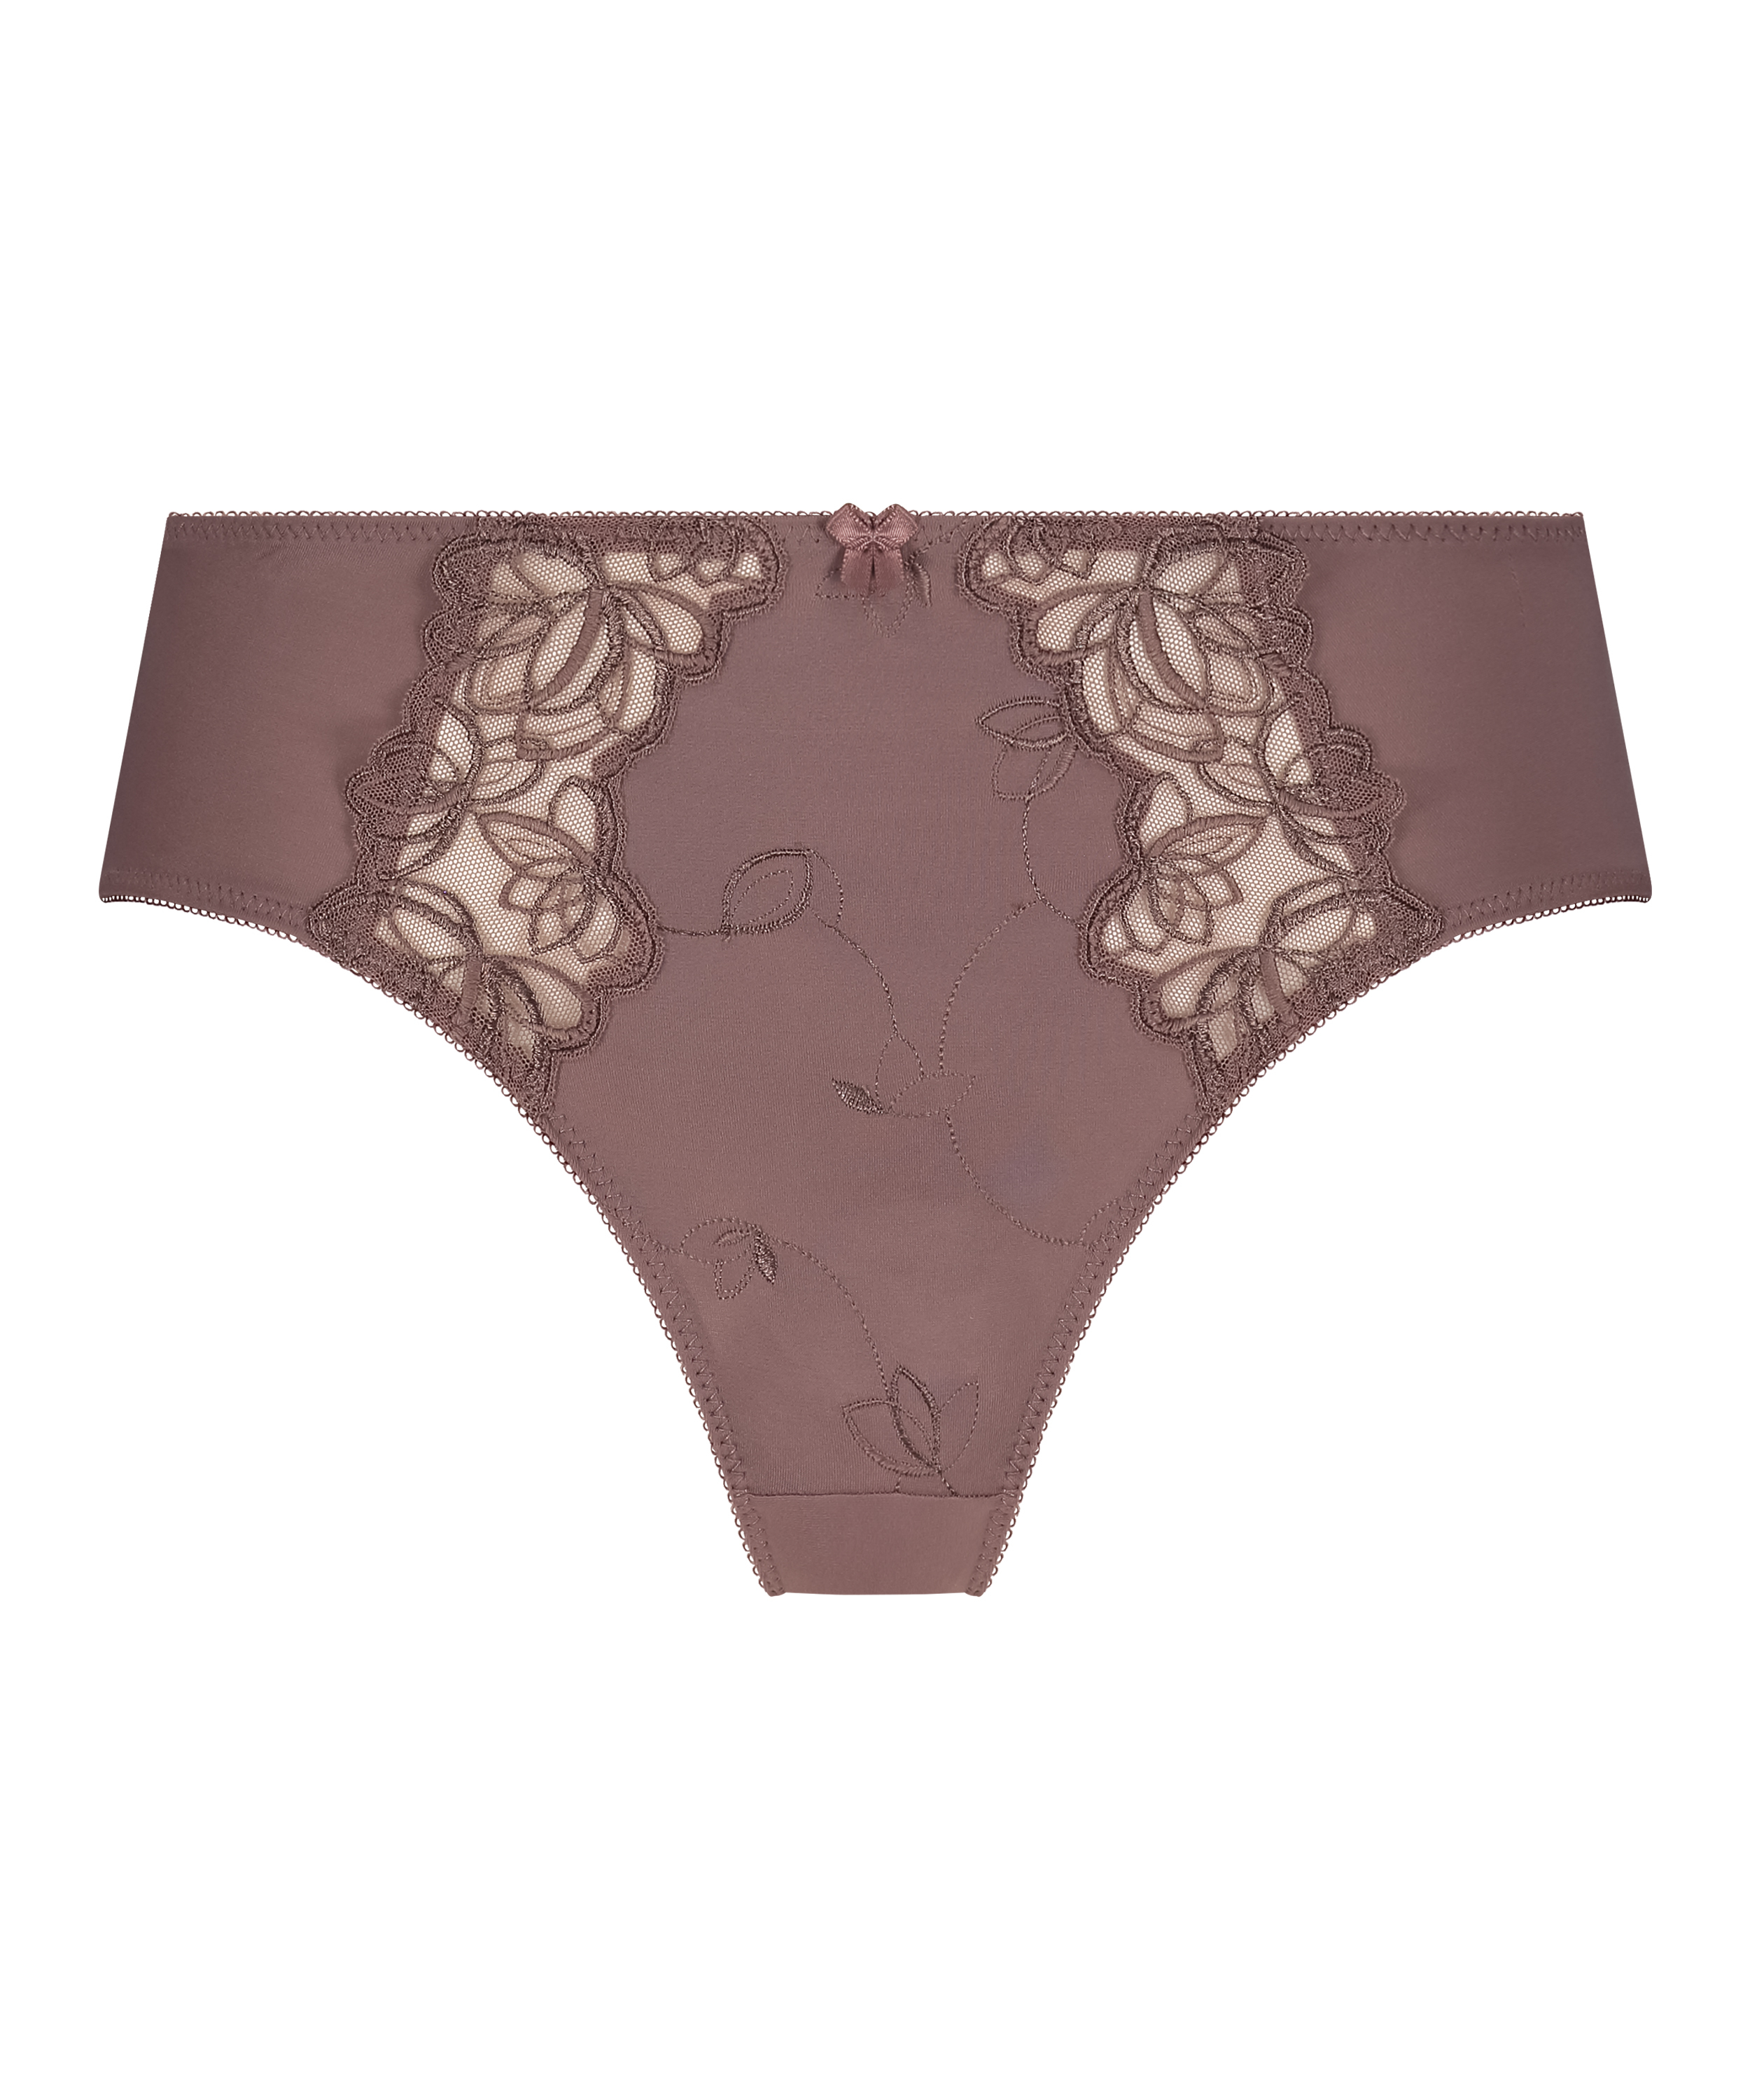 Diva high knickers, Brown, main